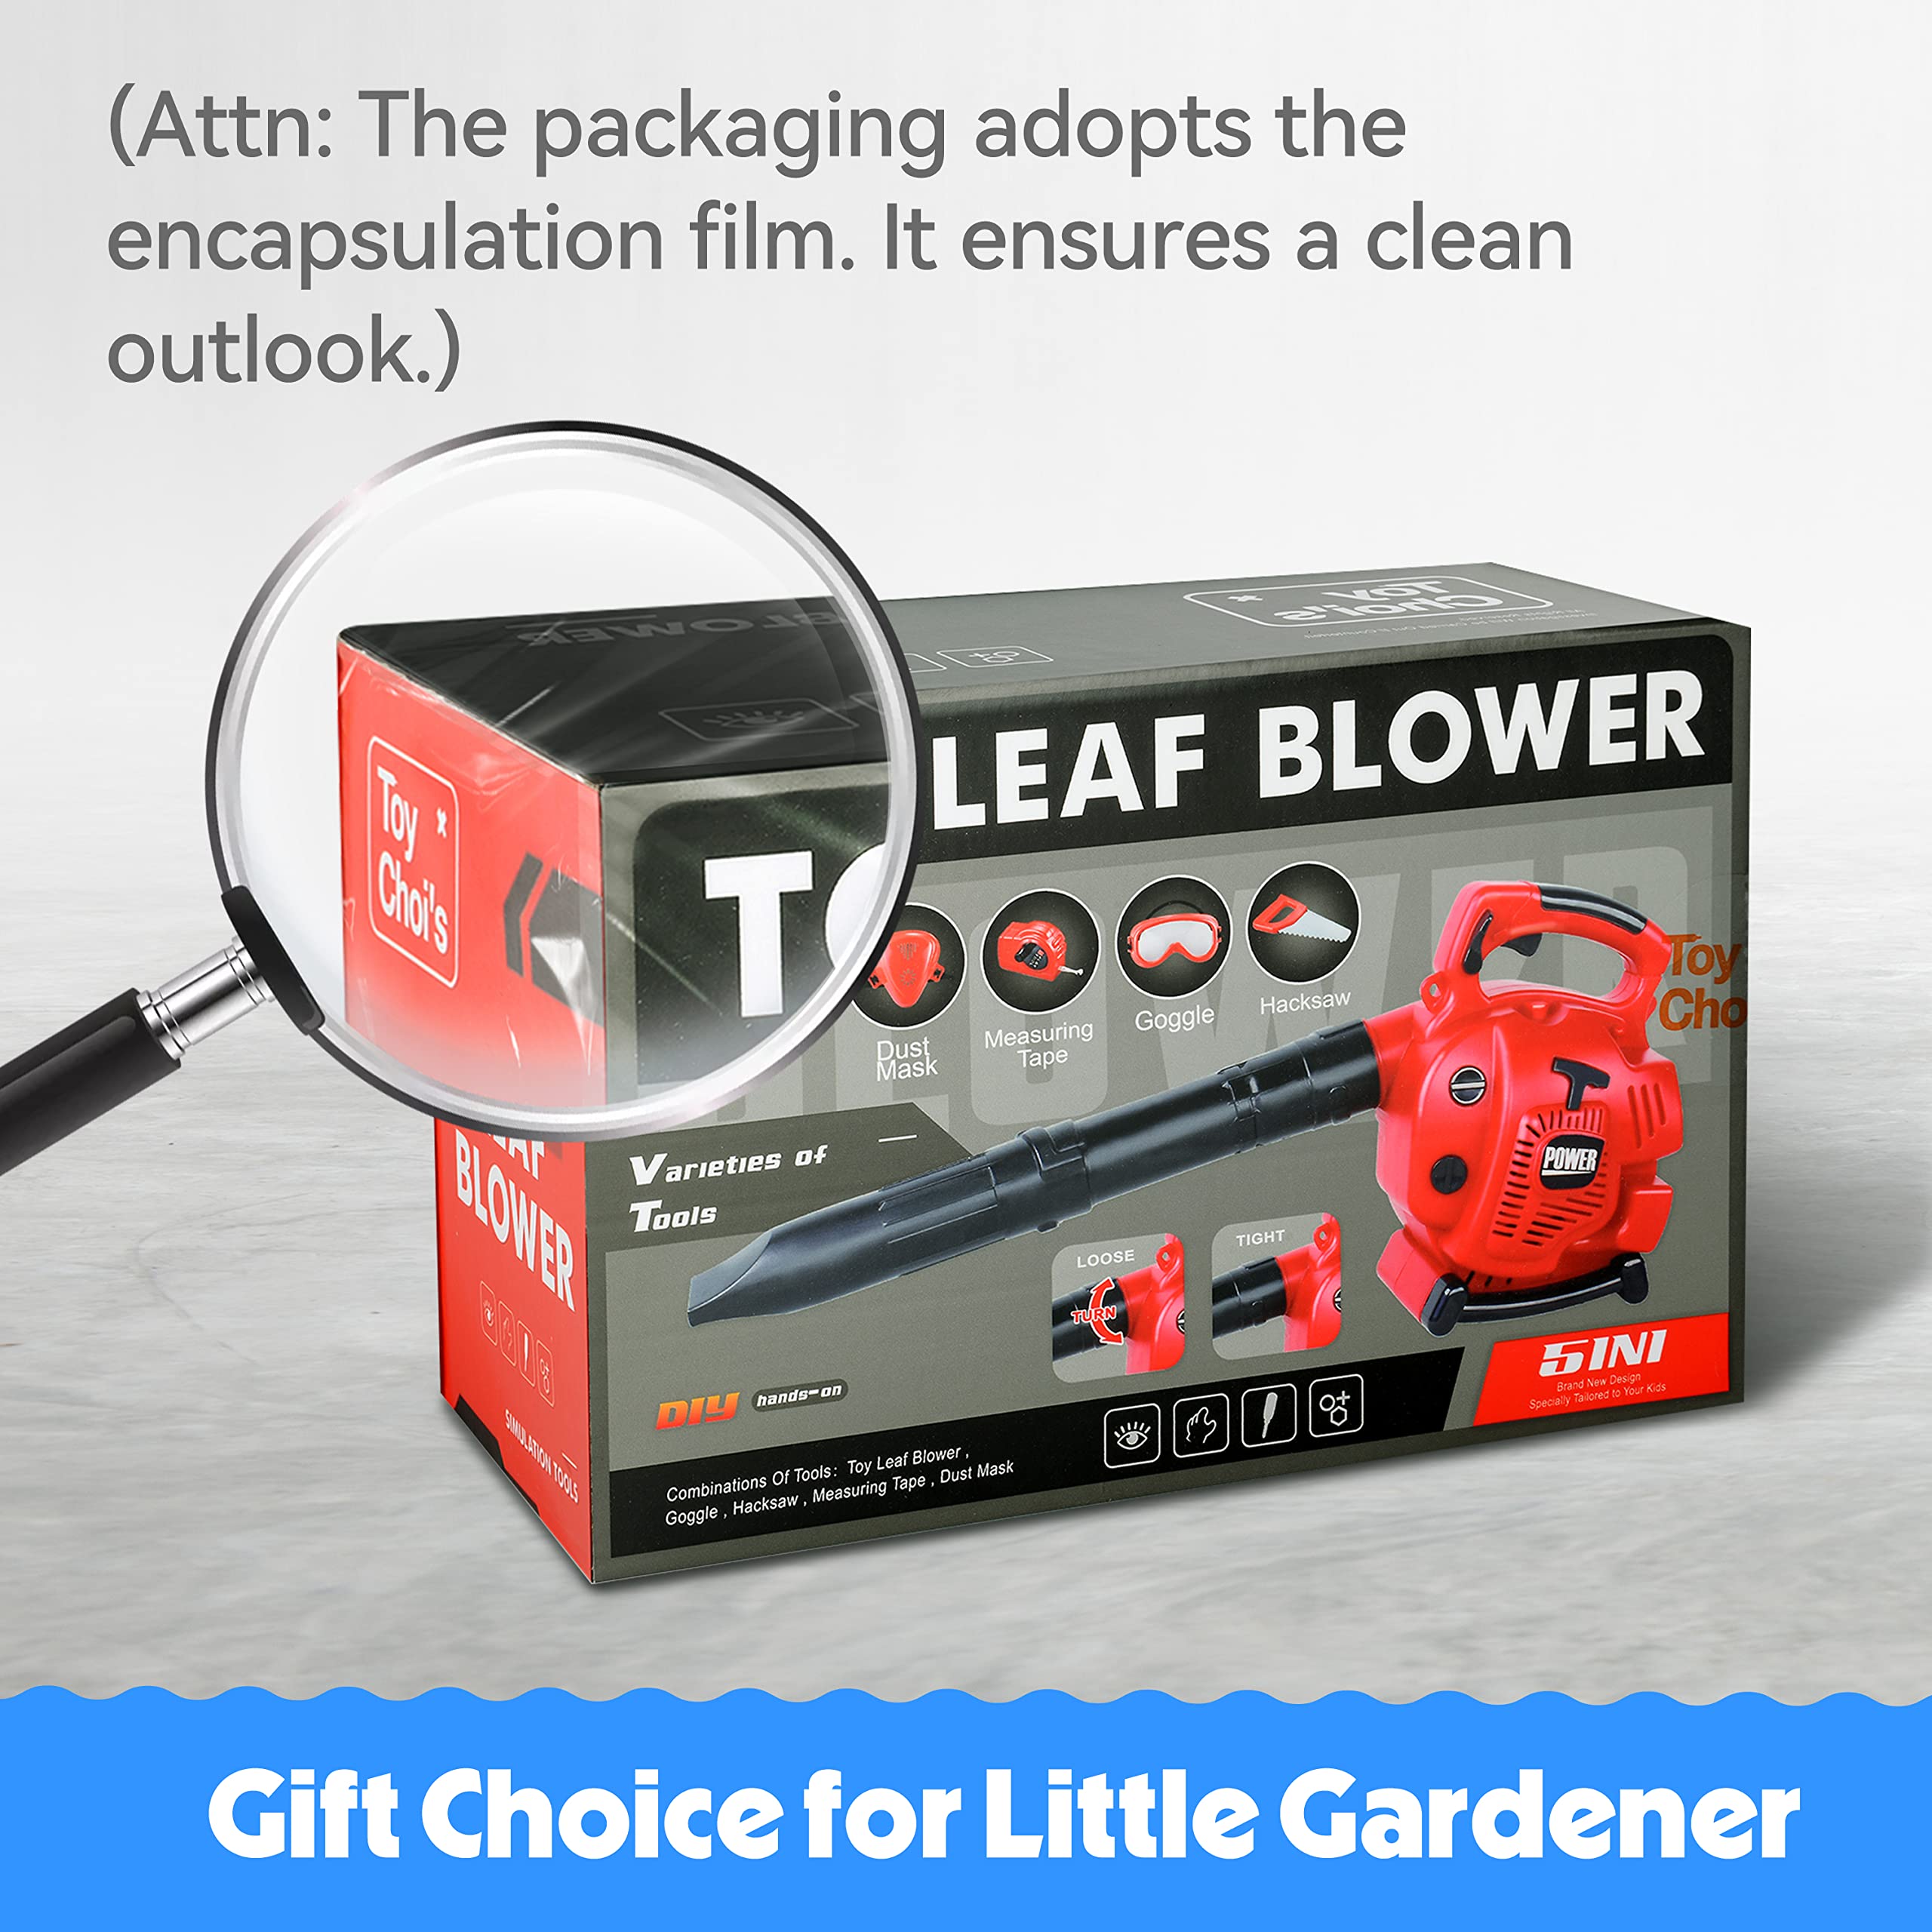 Toy Choi's Pretend Play Series Leaf Blower Toy Tool Play Set, Outside Construction Work Shop Toy Tool Kit Outdoor Preschool Gardening Lawn Toy Gift for Kids Toddler Baby Children Boys and Girls